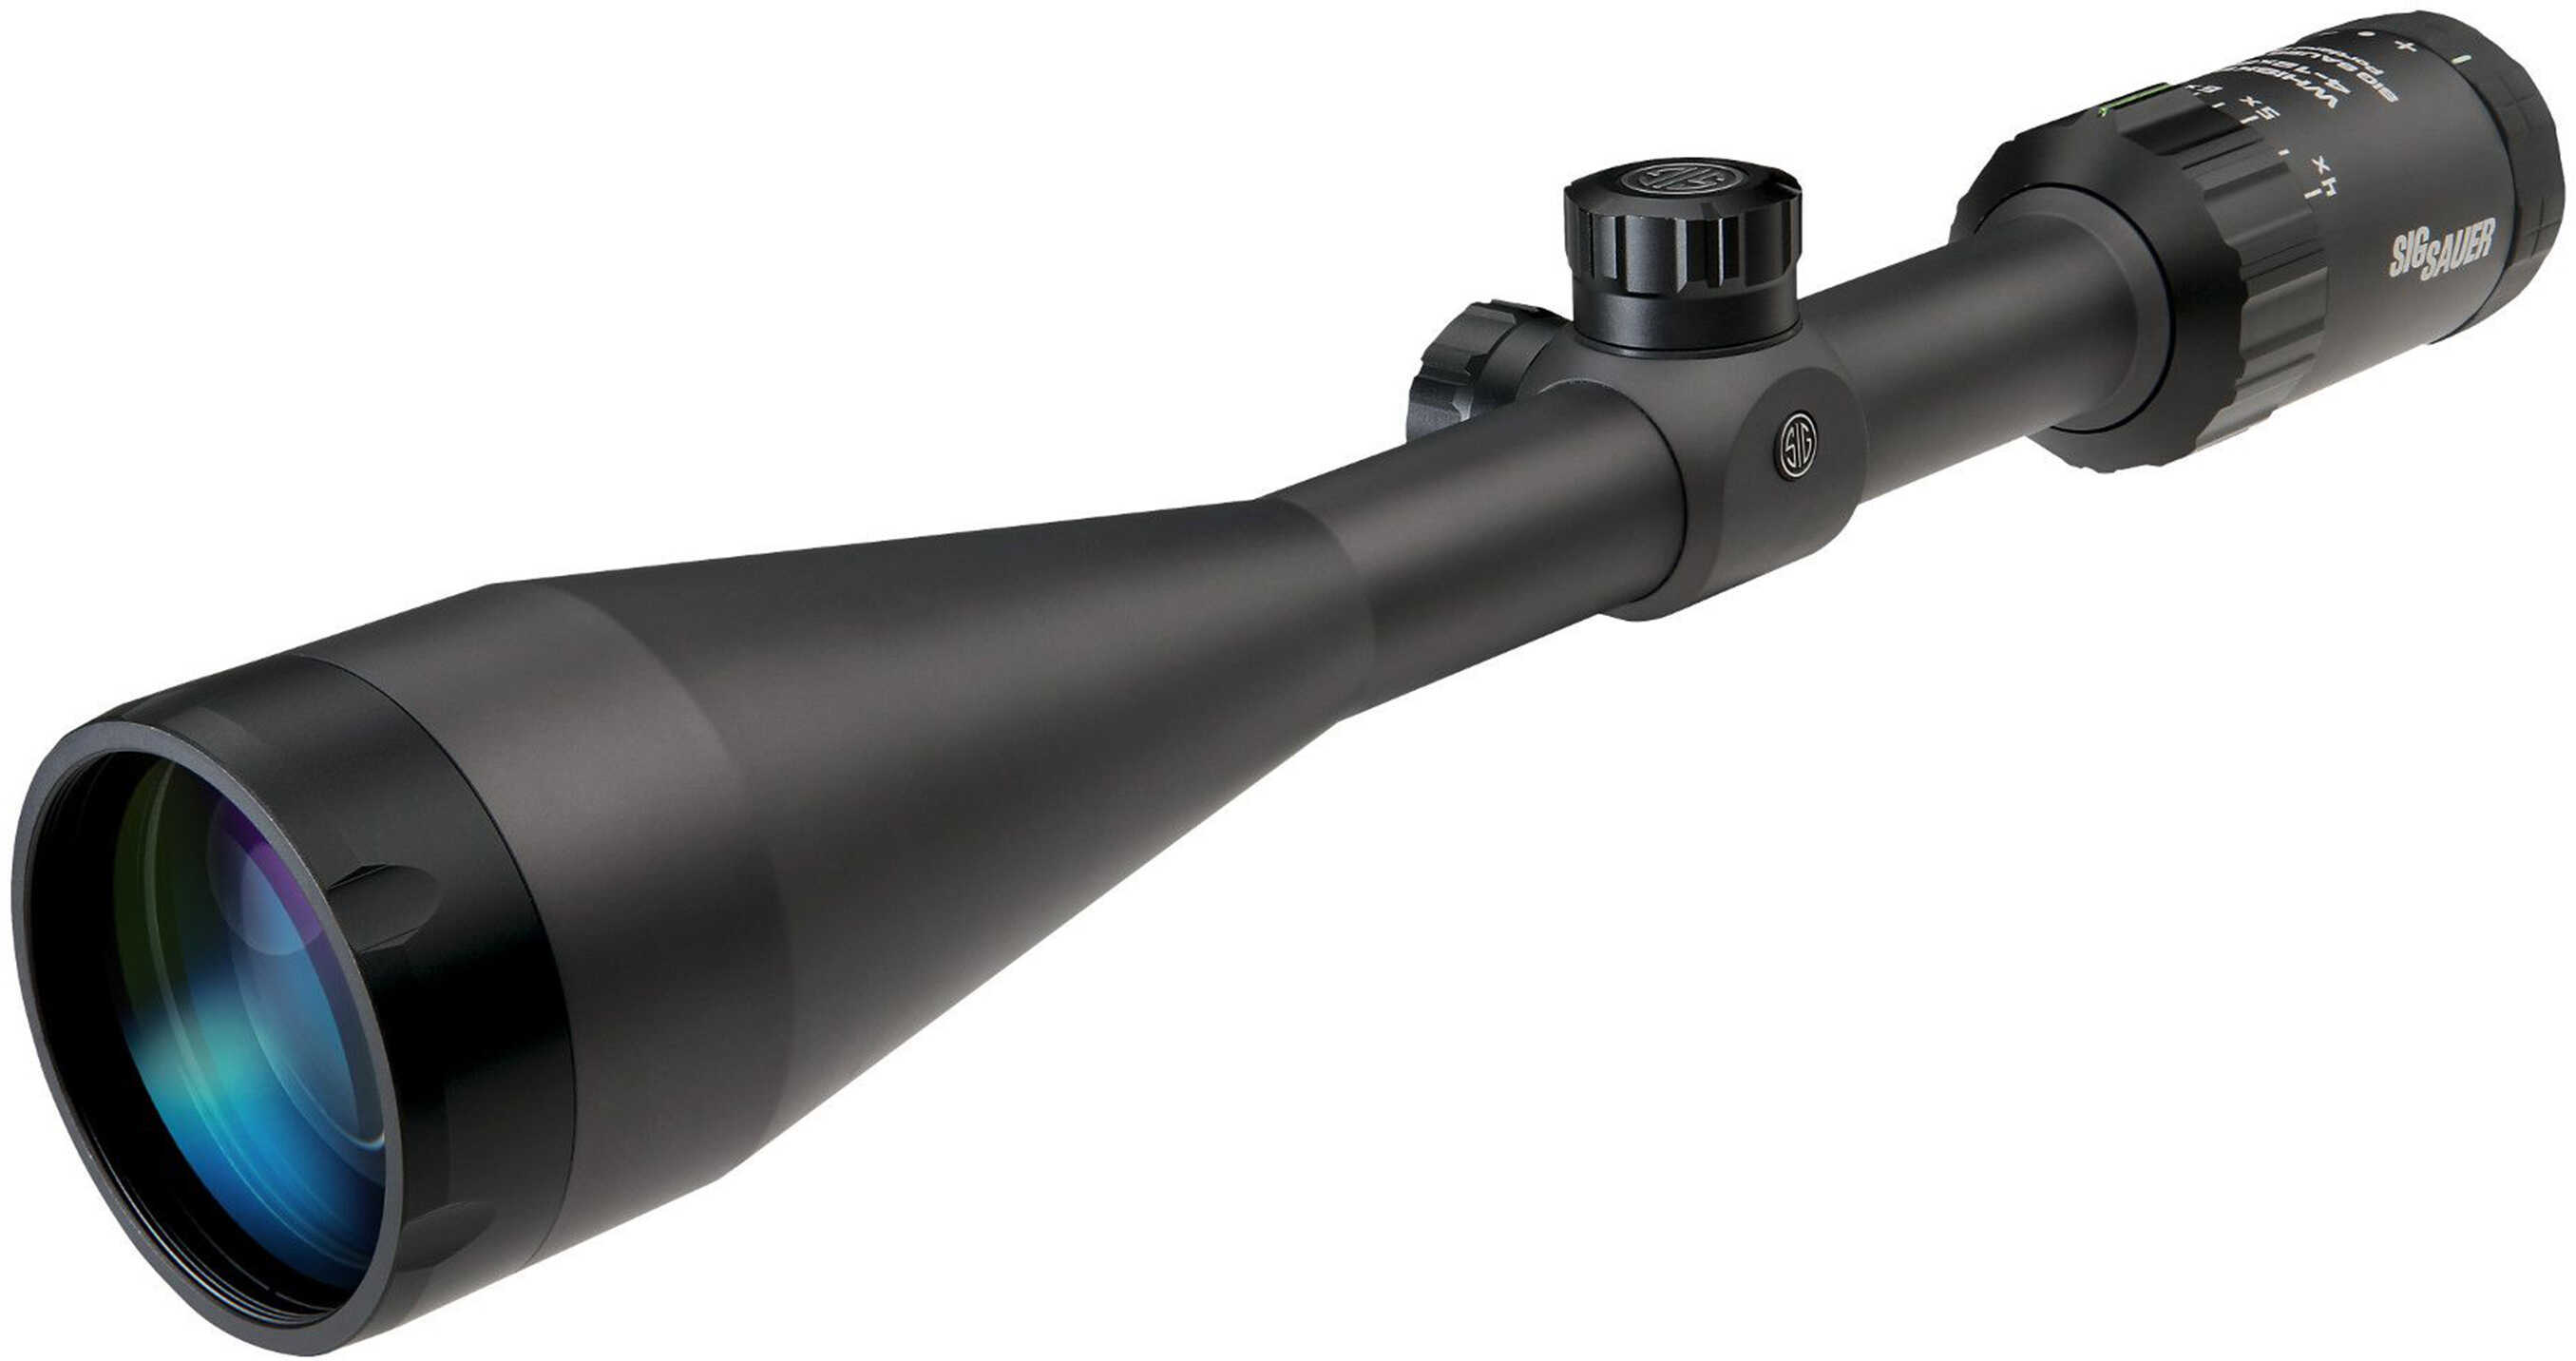 Sig Sauer Whiskey3 4-12x50mm Riflescope, Color: Black, Tube Diameter: 1 in